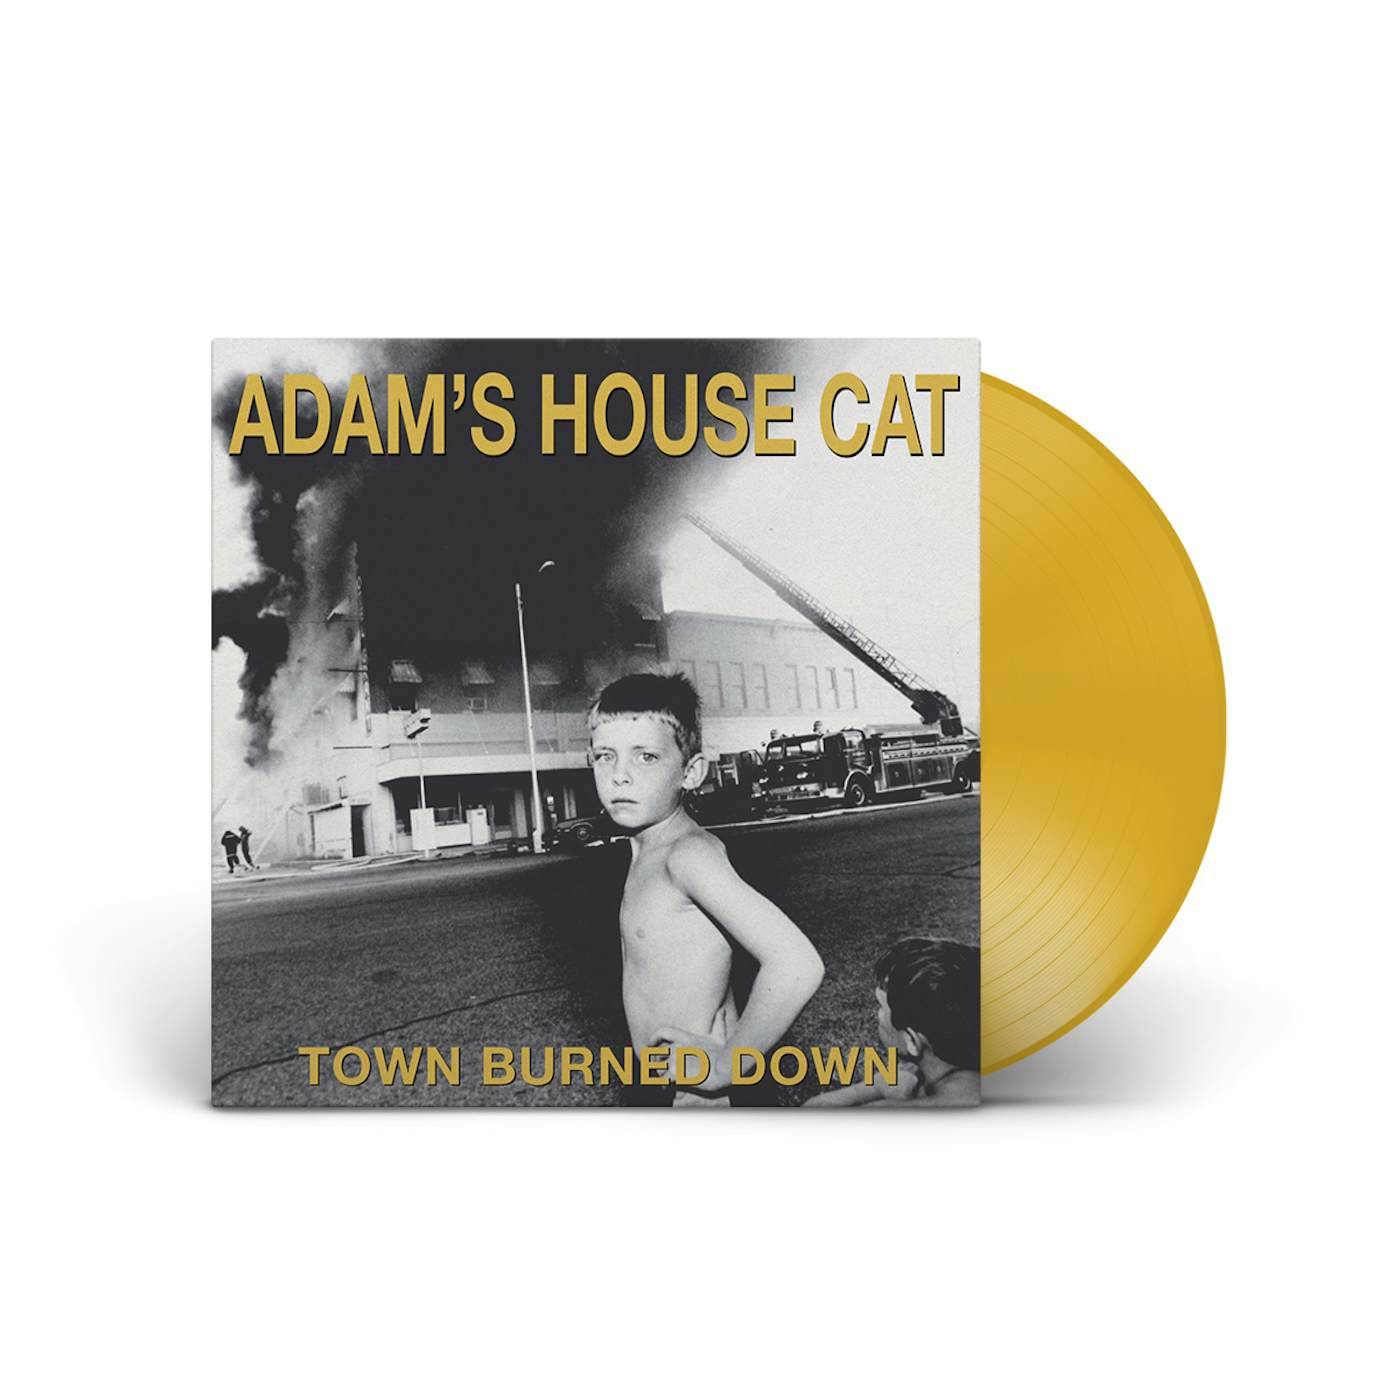 Drive-By Truckers Adam's House Cat - Town Burned Down LP (Vinyl)